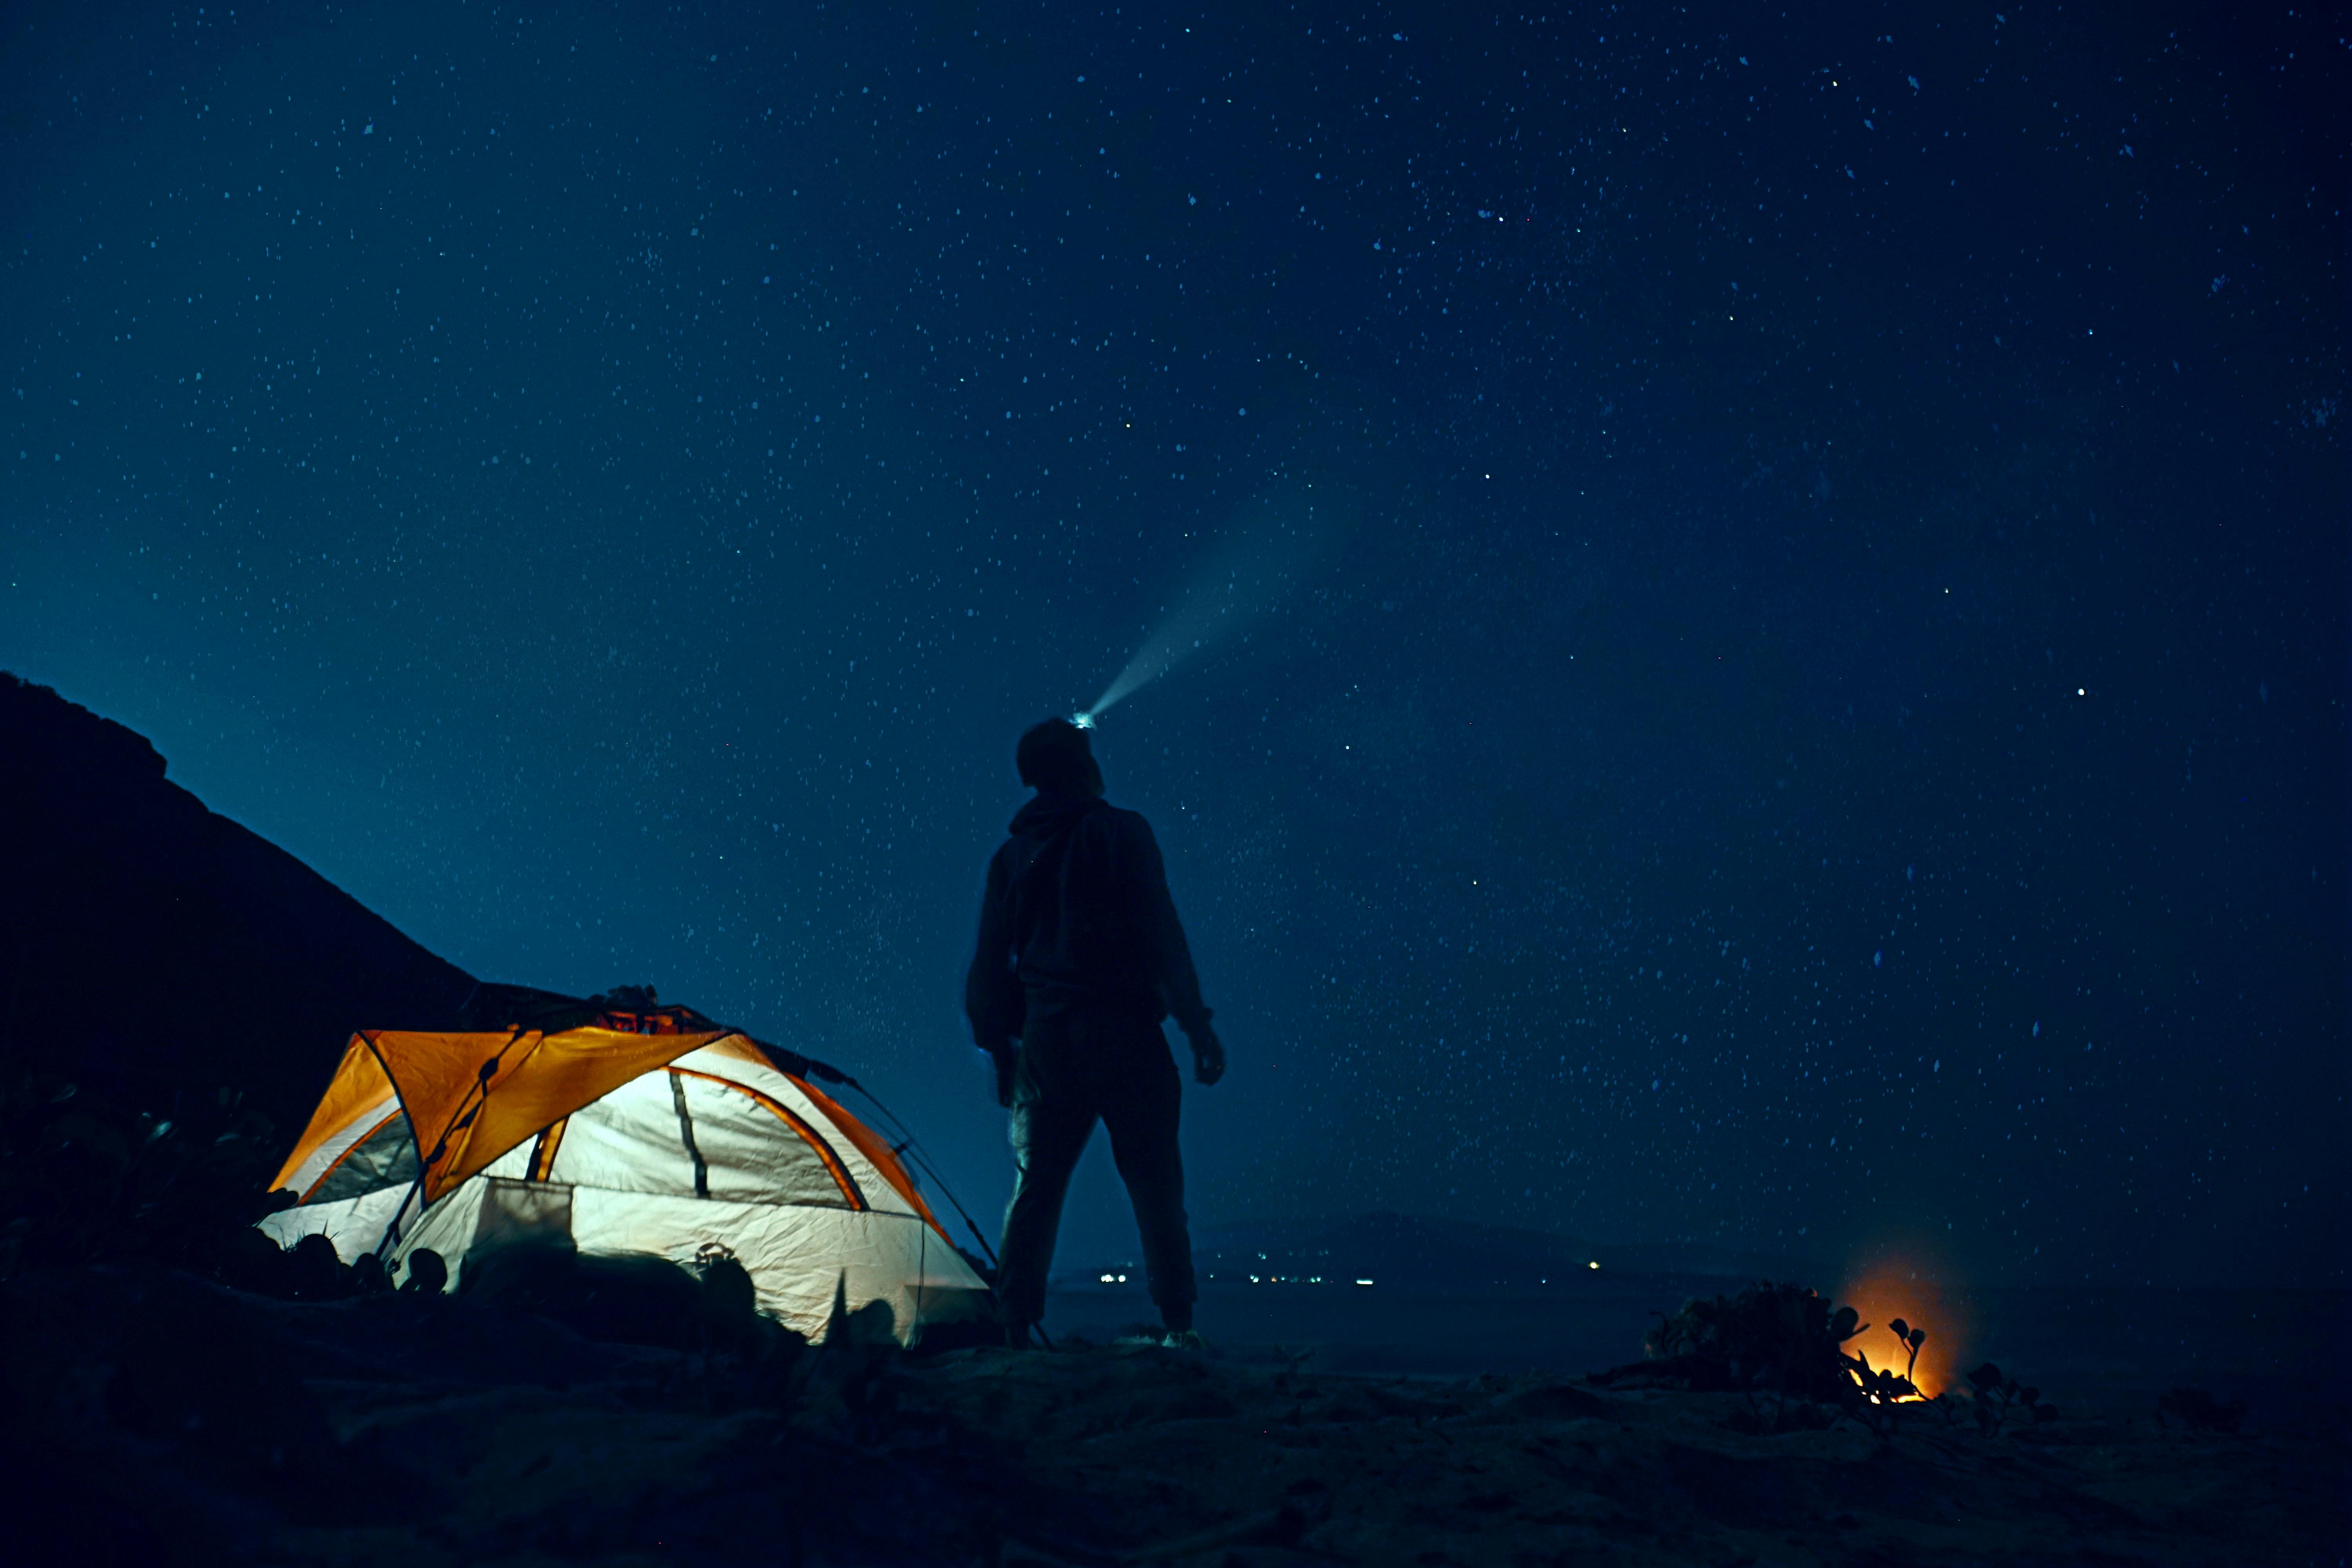 A lit up tent glows in the darkness while a figure with a headlamp stands next to it